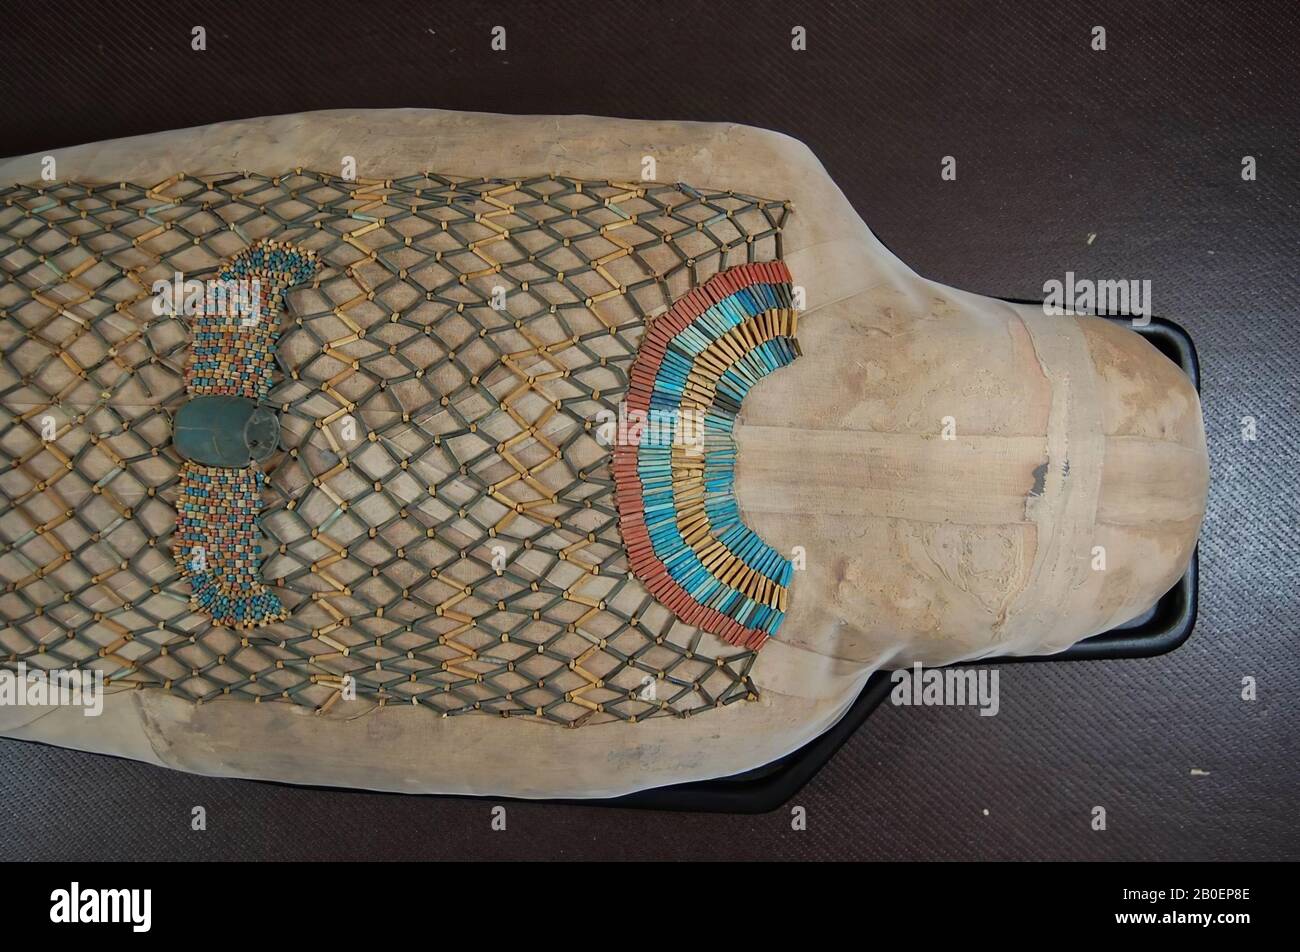 Pawiamen, wade, beadnet, Mummy or an adult. The bandages are applied in  concentric patterns, with only a small protruding edge per winding. They  are fairly wide, larger, and pale in color. One